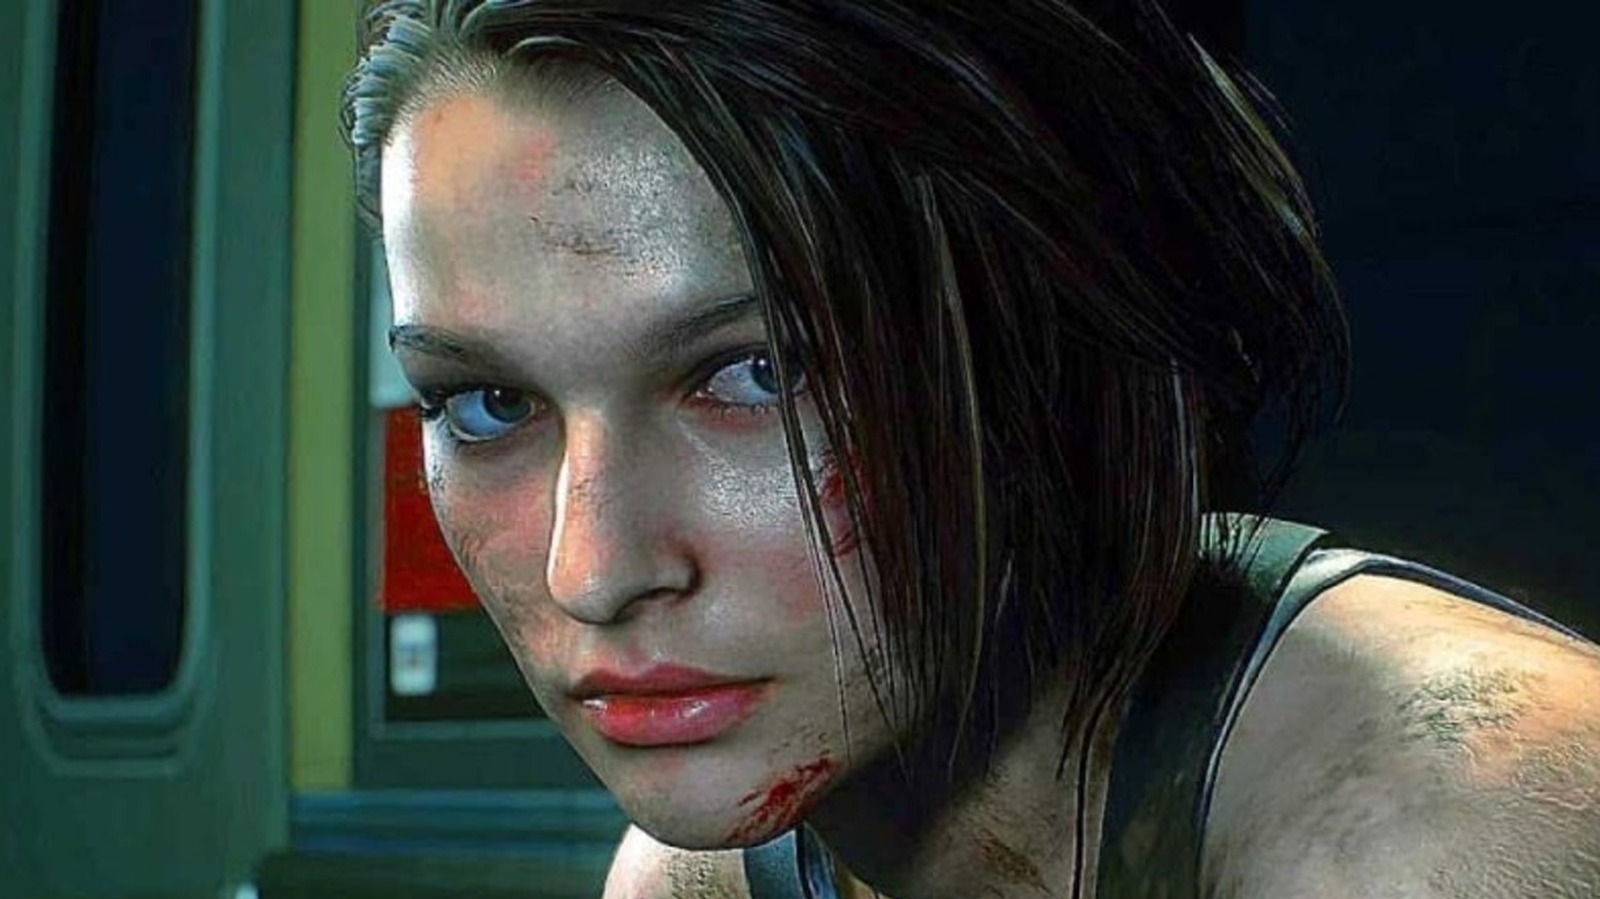 Every Resident Evil Remake, Ranked From Worst To Best